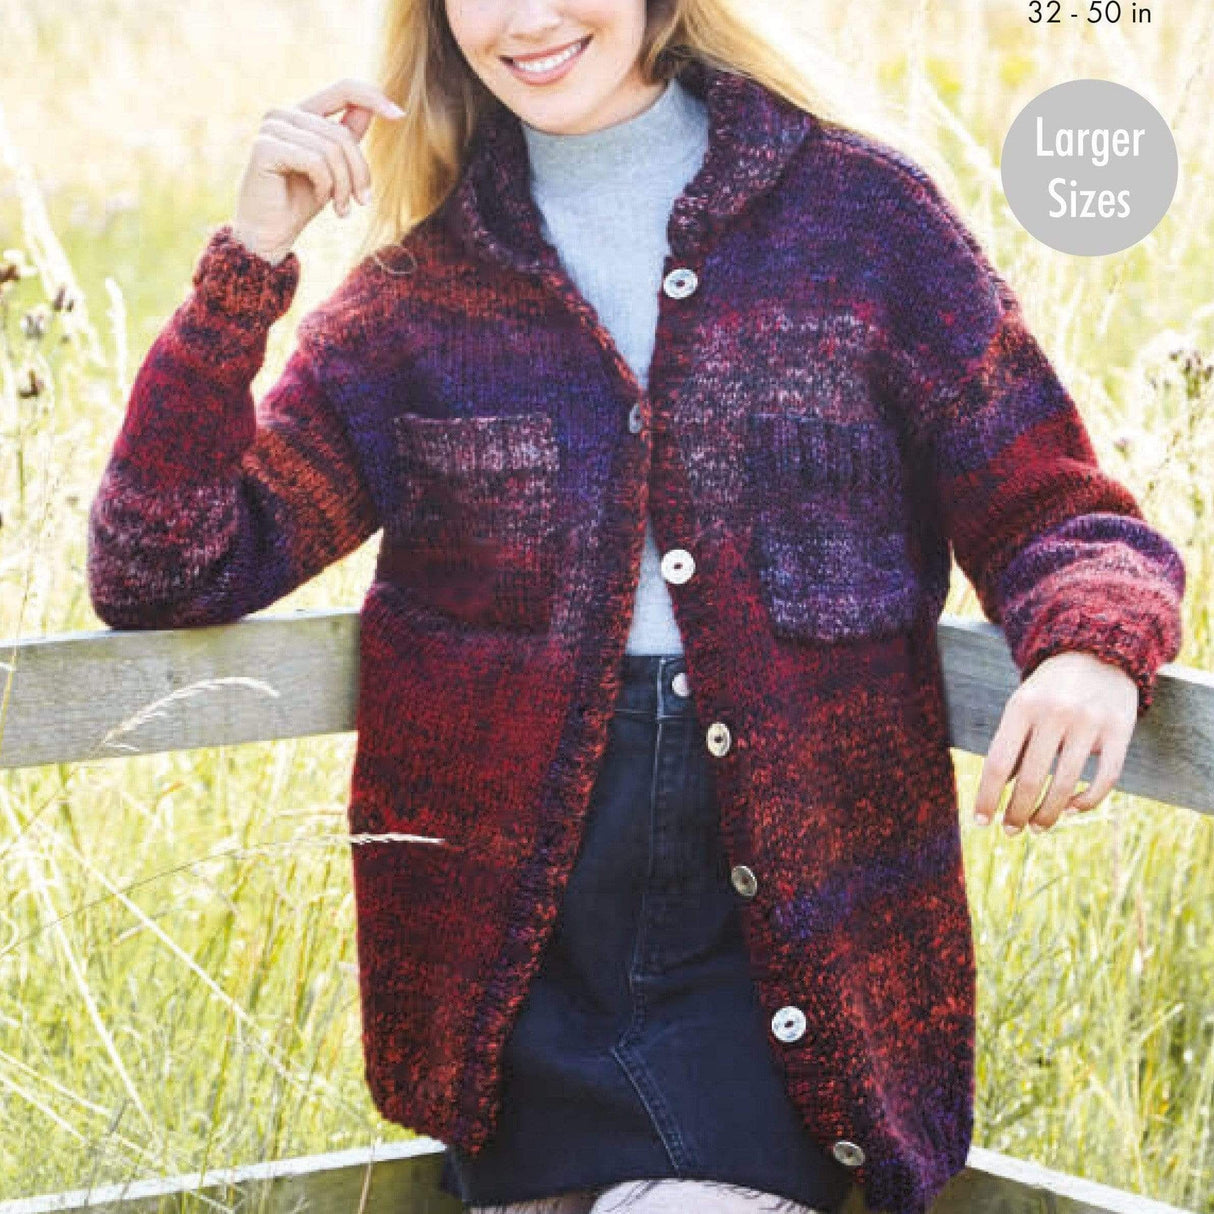 King Cole Patterns King Cole Ladies Chunky Knitting Pattern 5813